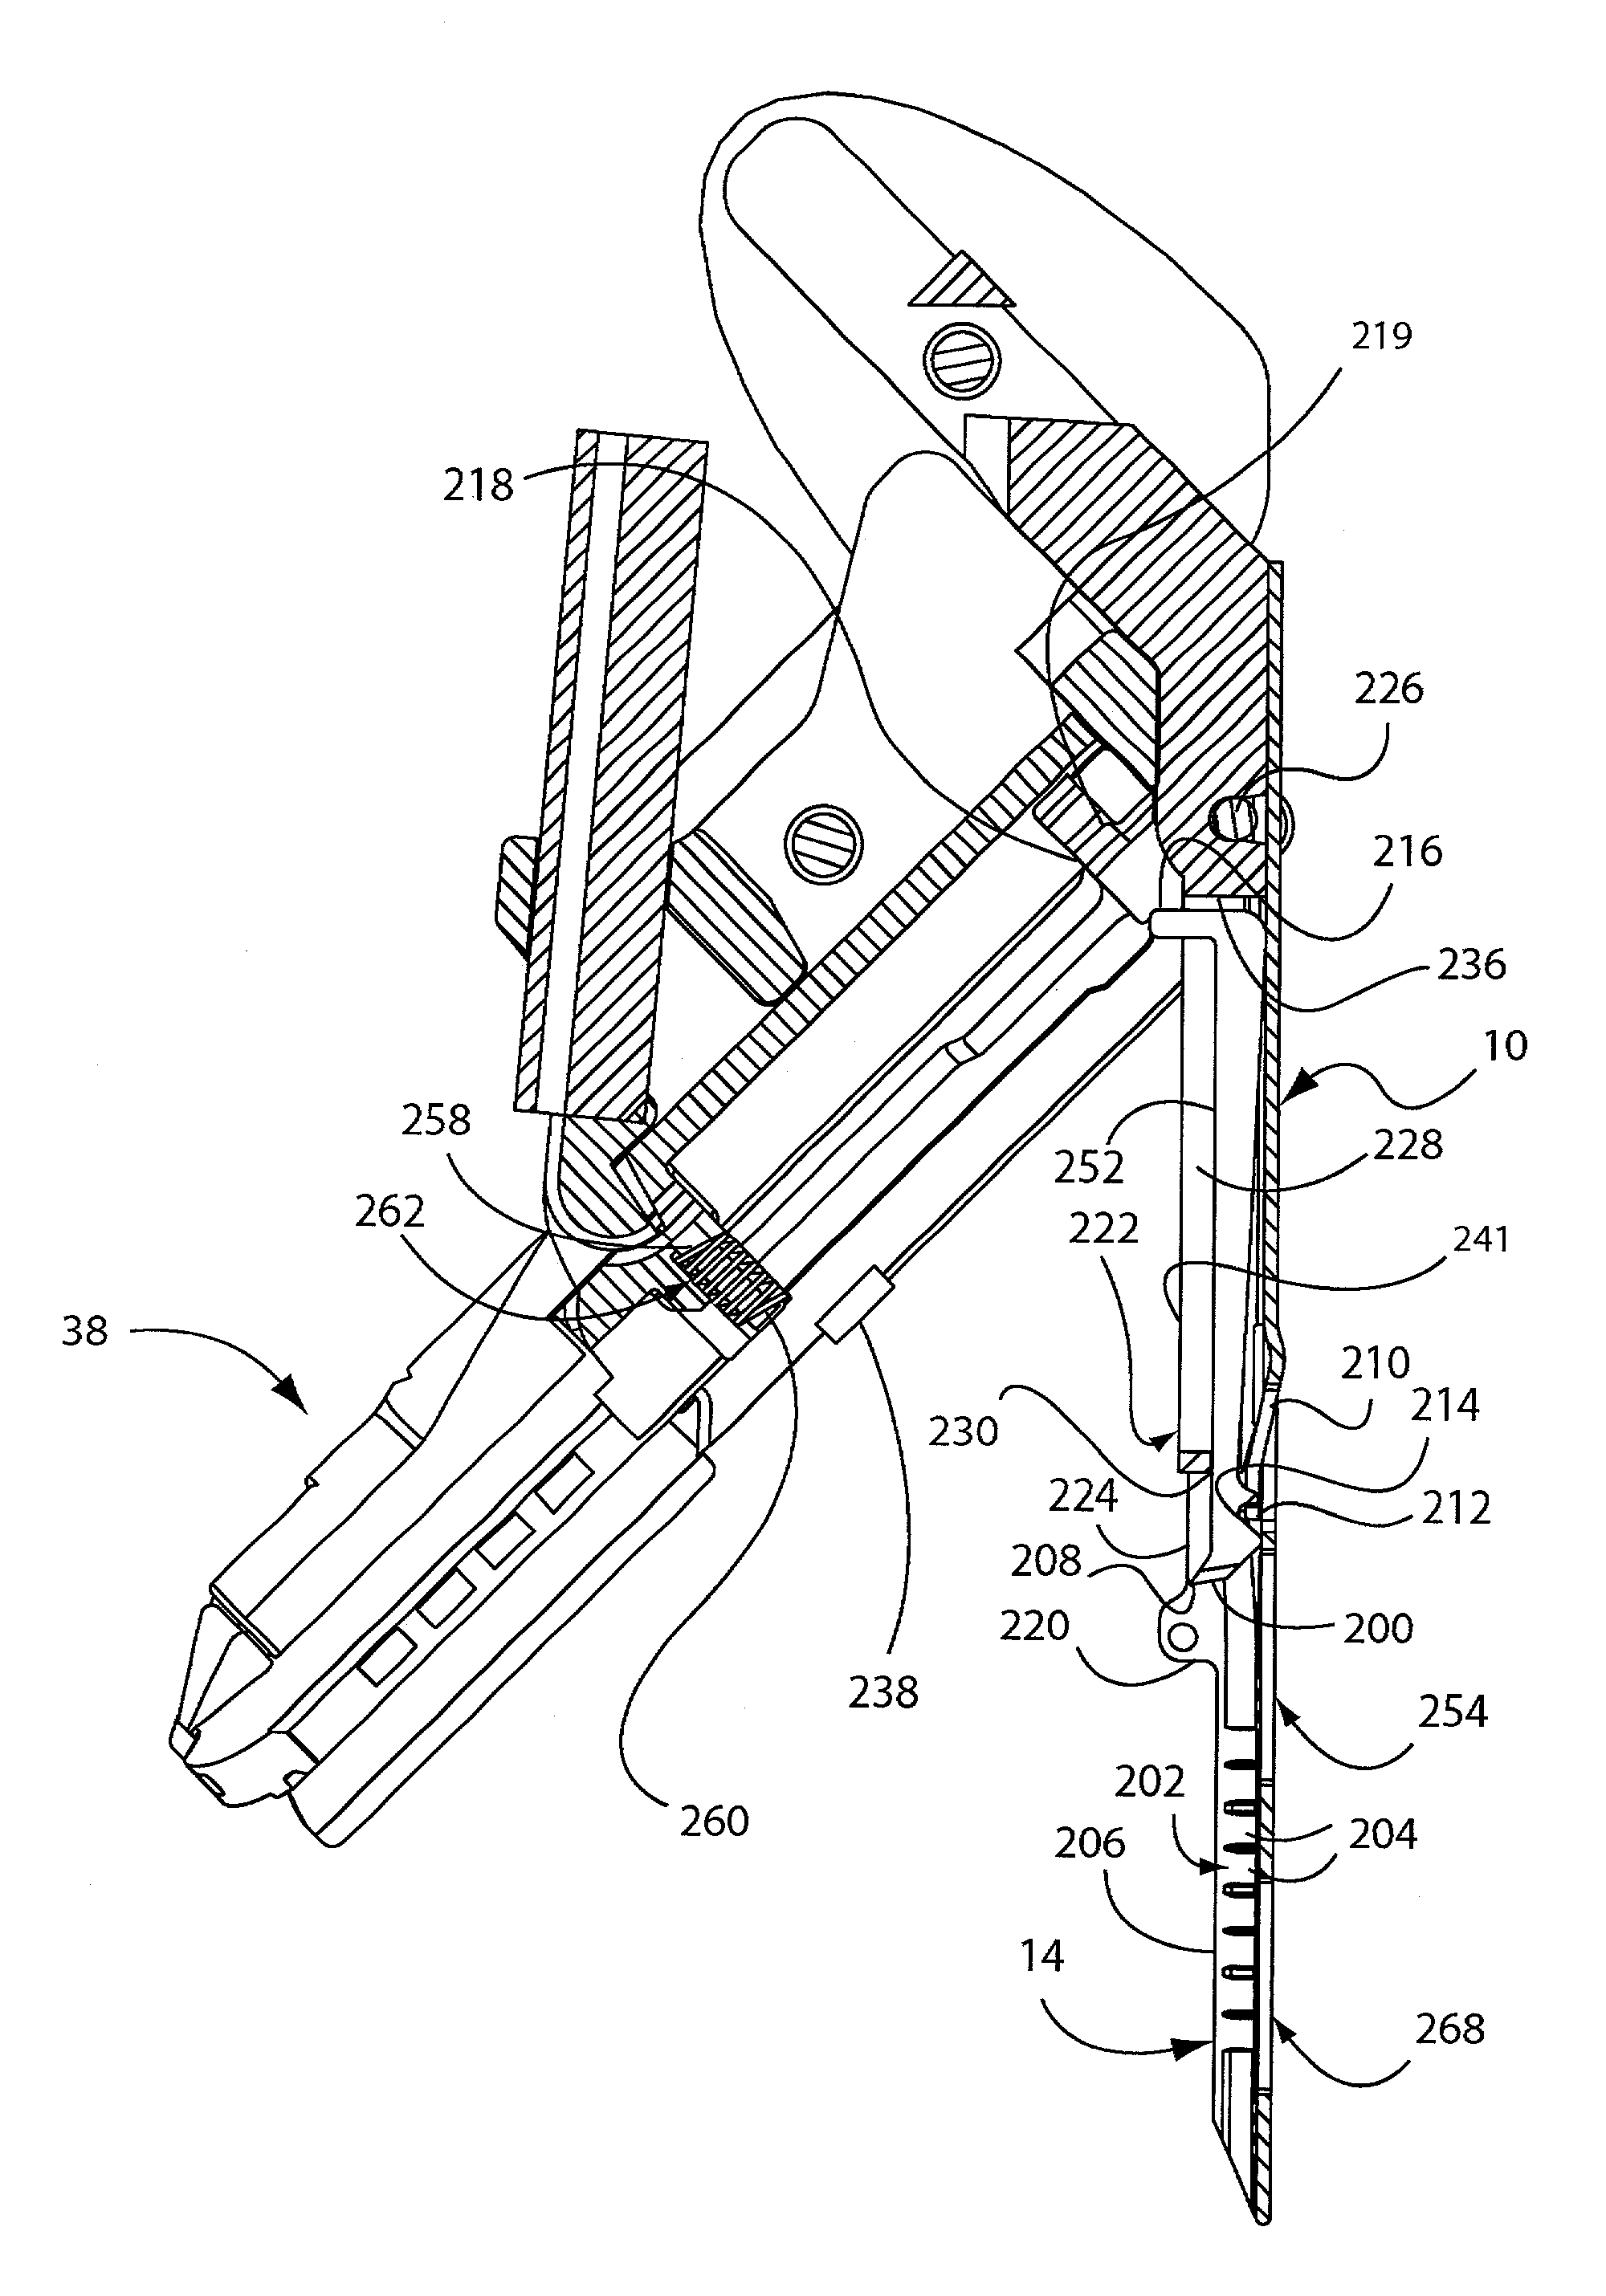 System for performing anastomosis